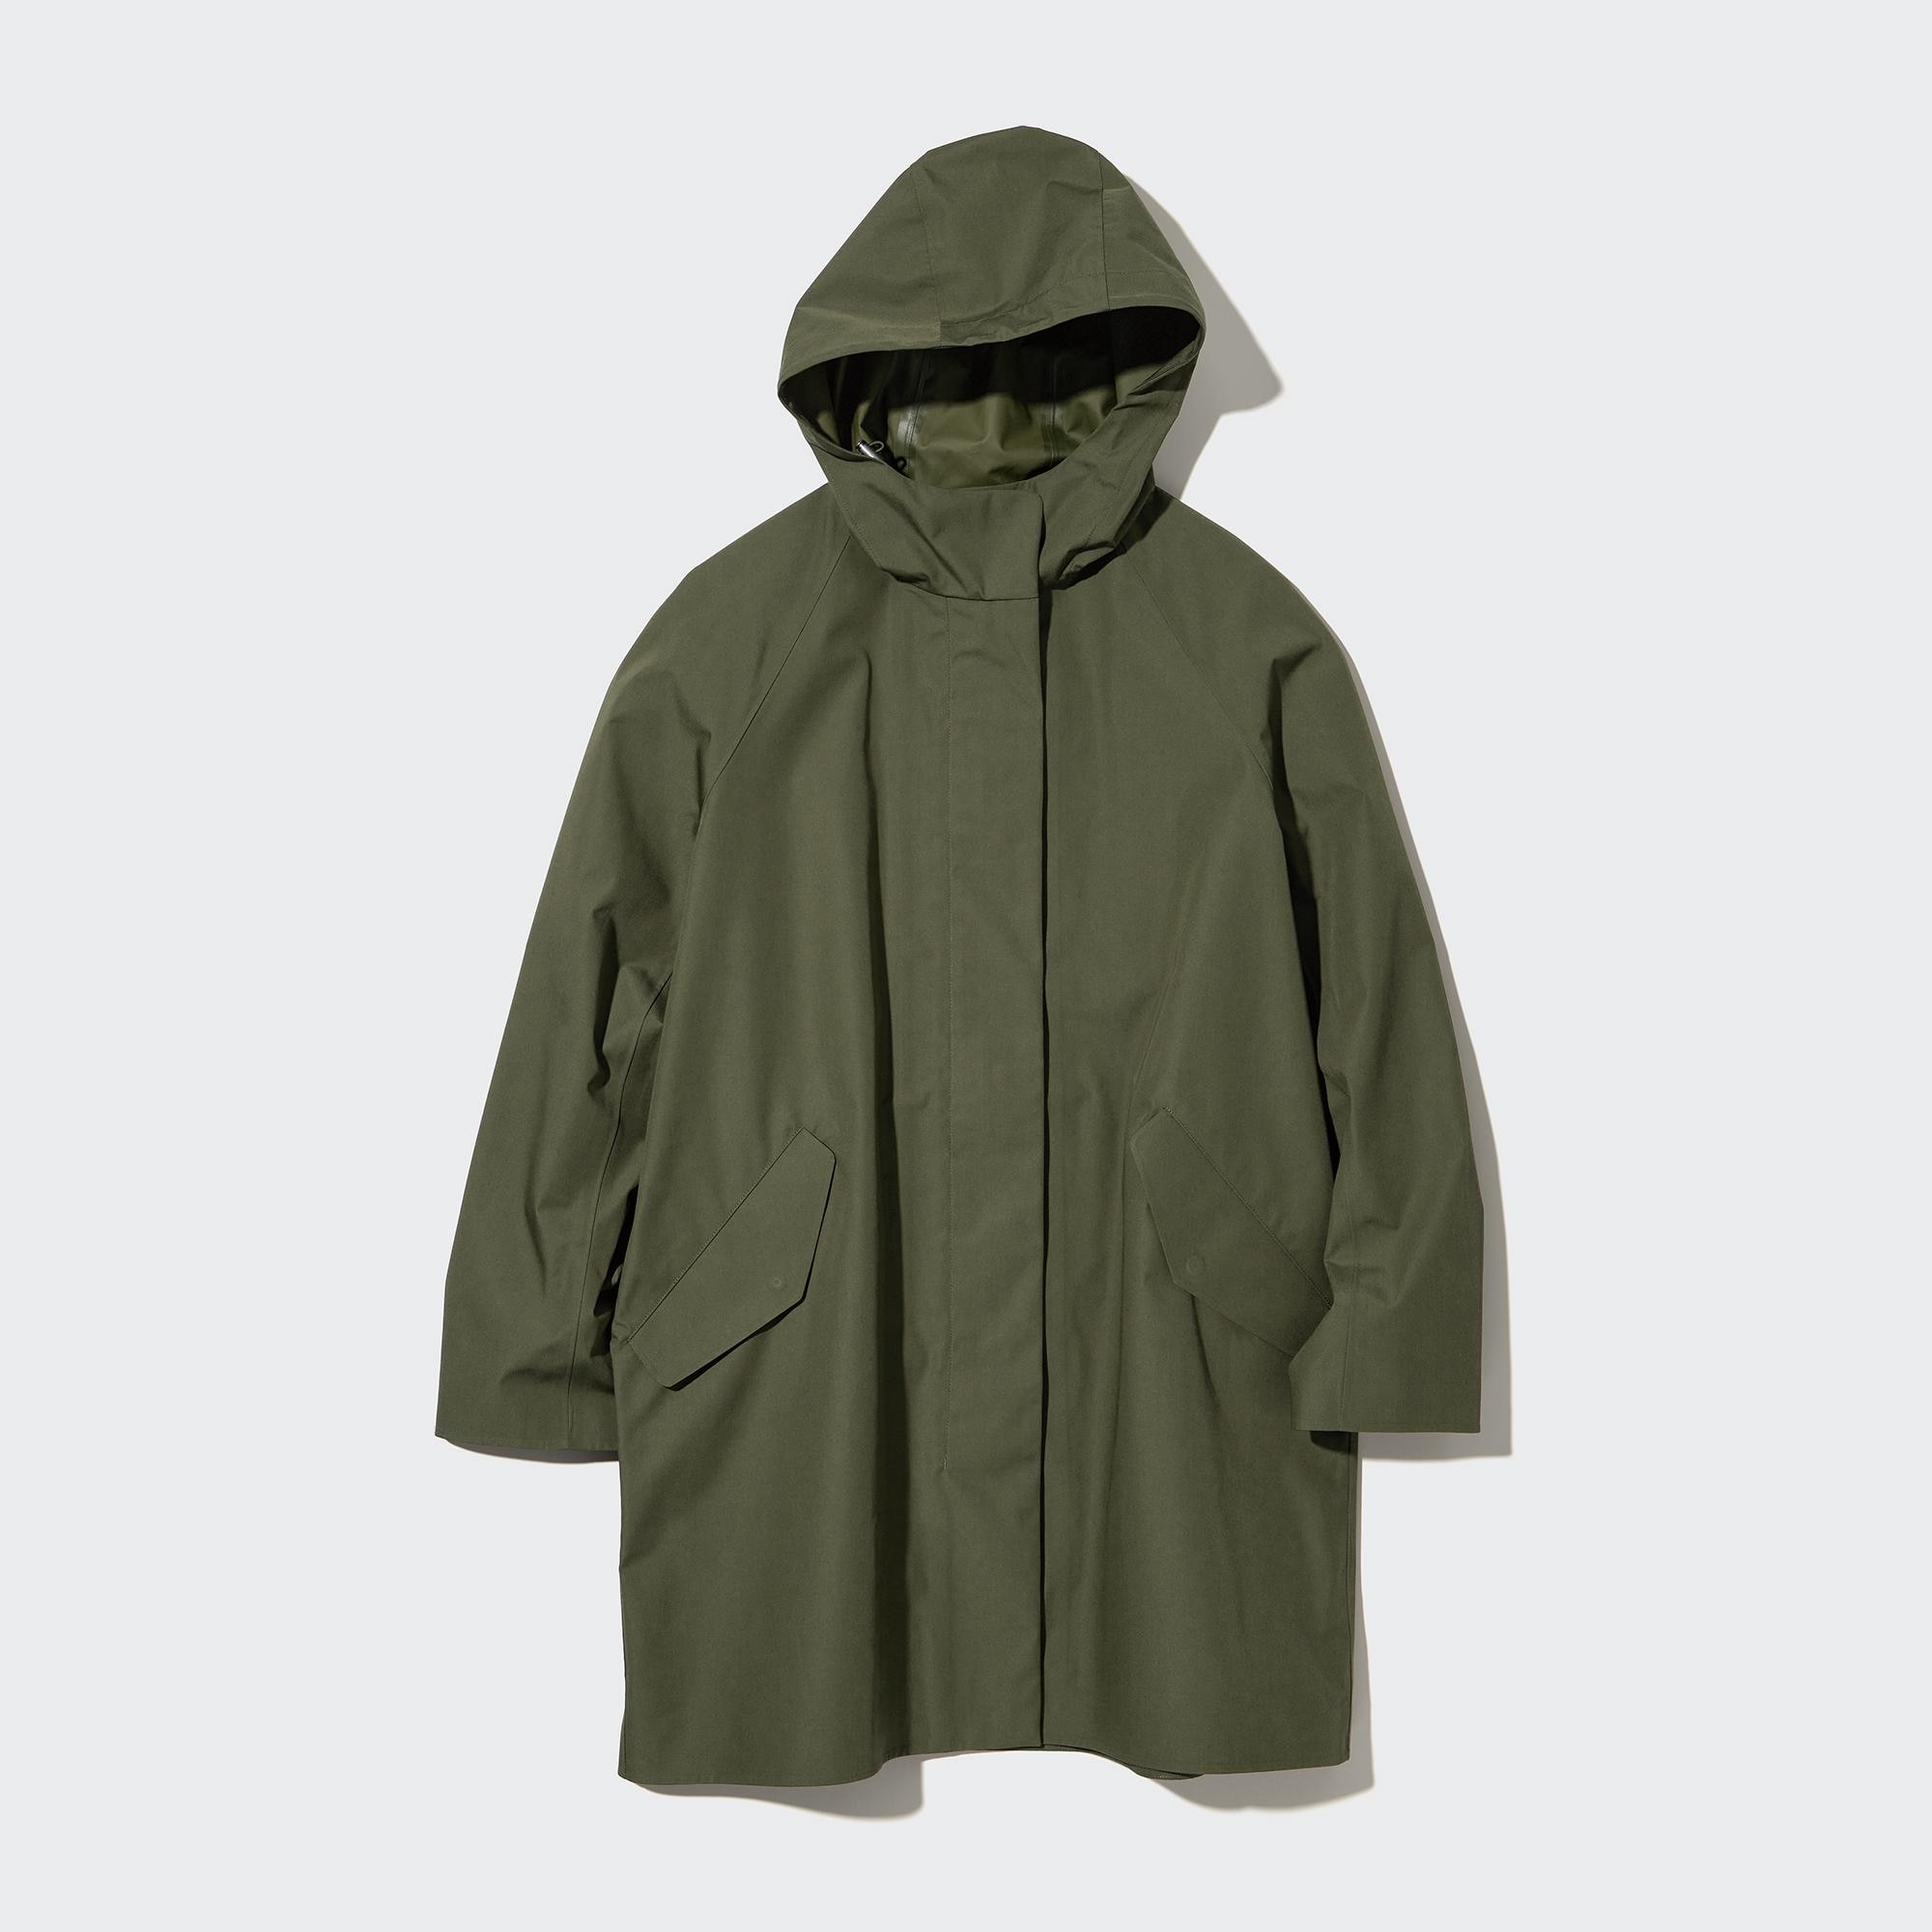 MENS SMOOTH JERSEY LINED PARKA  UNIQLO PH